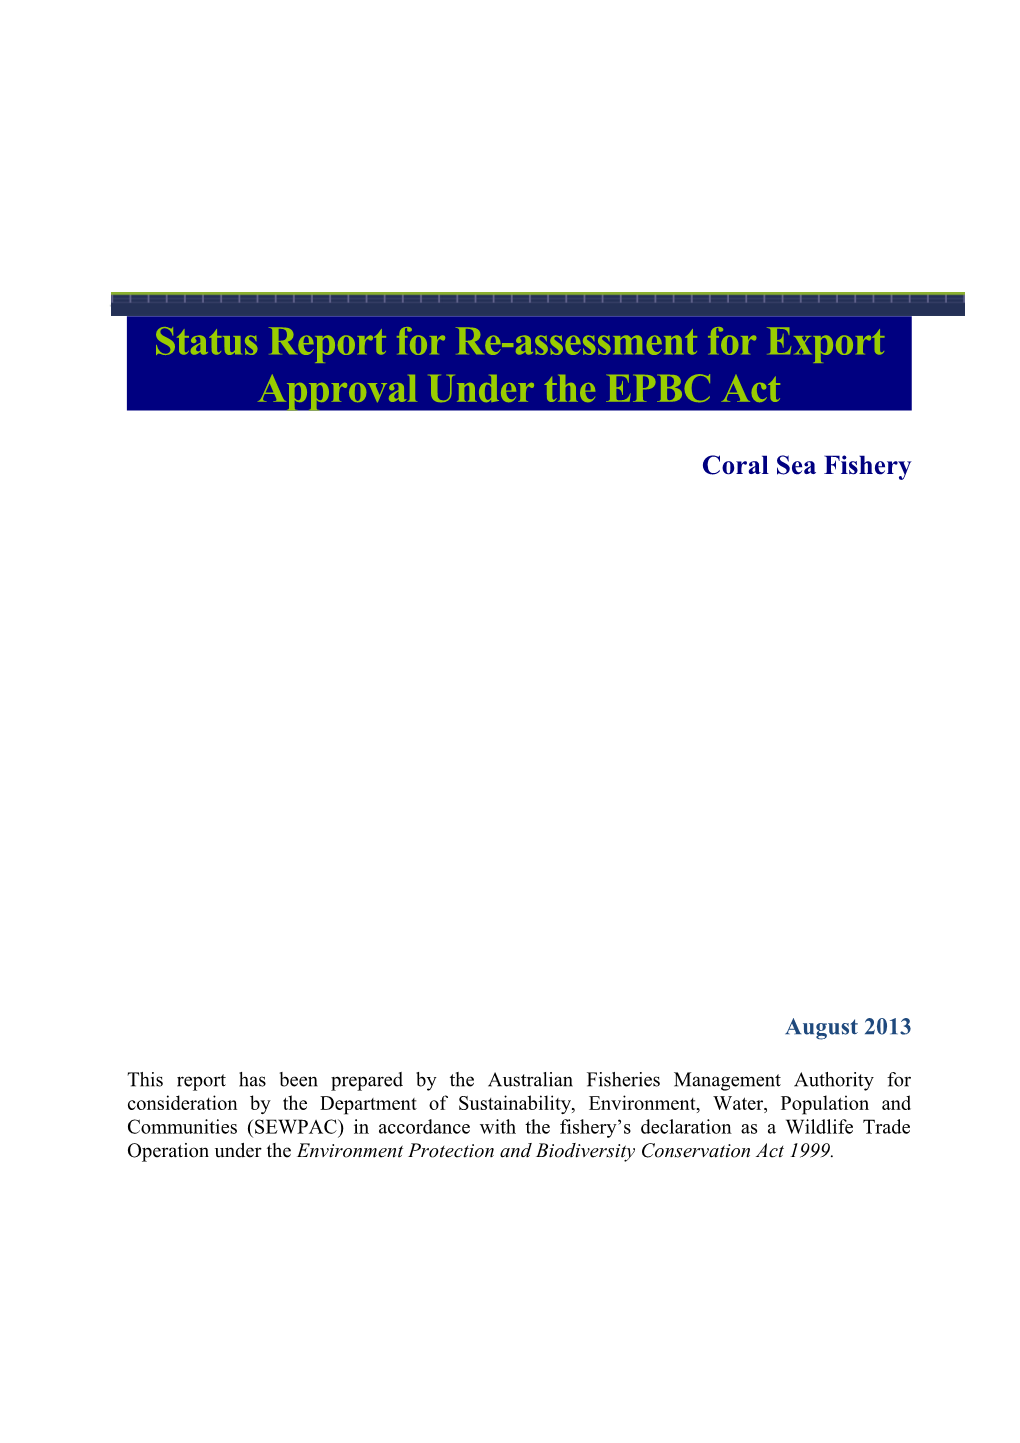 Coral Sea Fishery - Status Report for Re-Assessment for Export Approval Under the EPBC Act